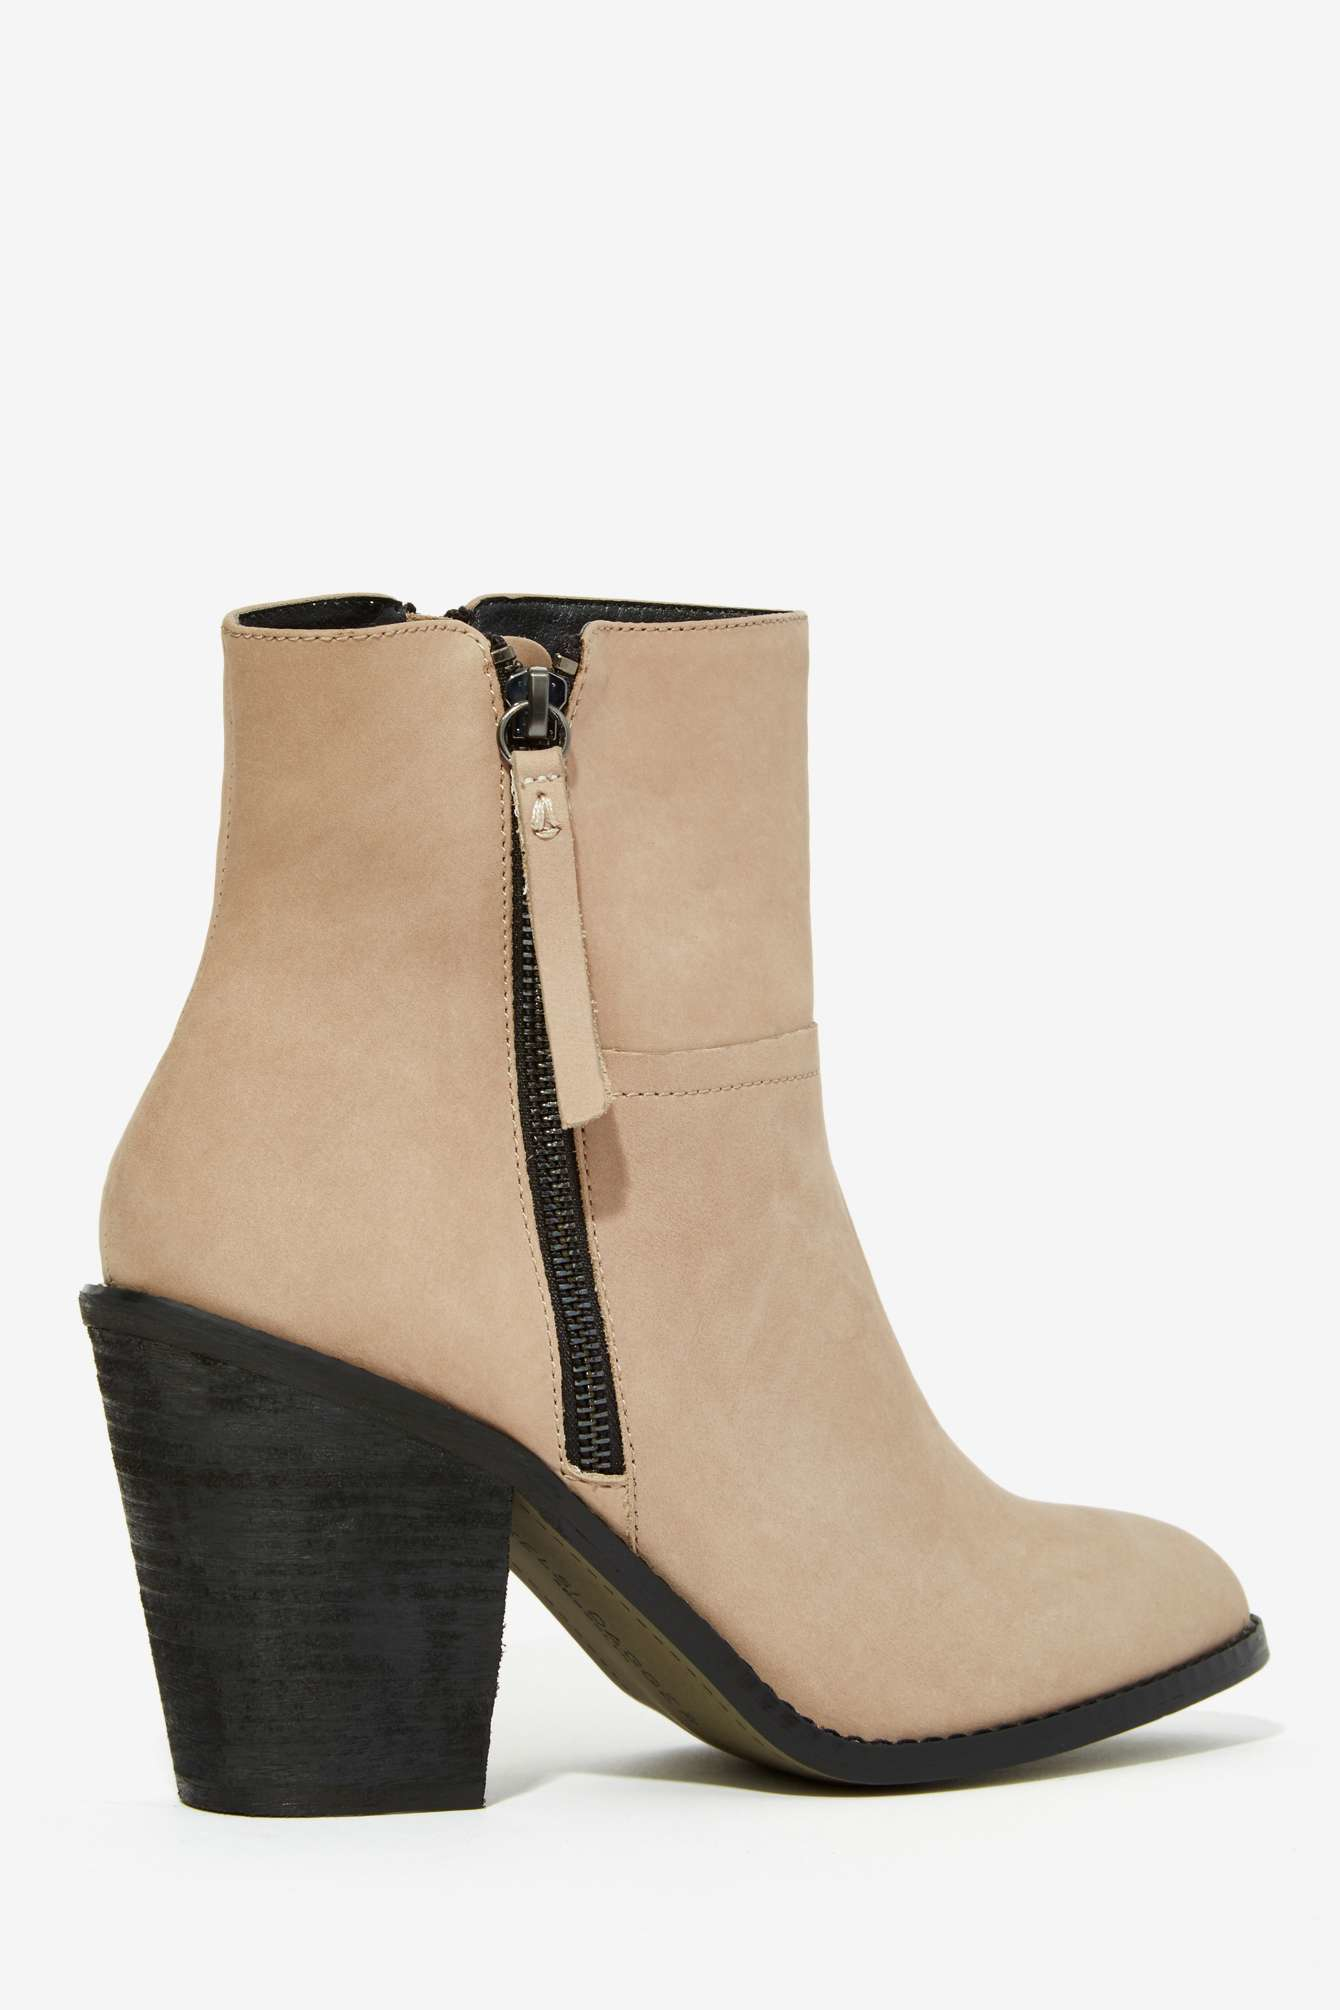 Kelsi dagger brooklyn Jetset Leather Boot in Natural | Lyst